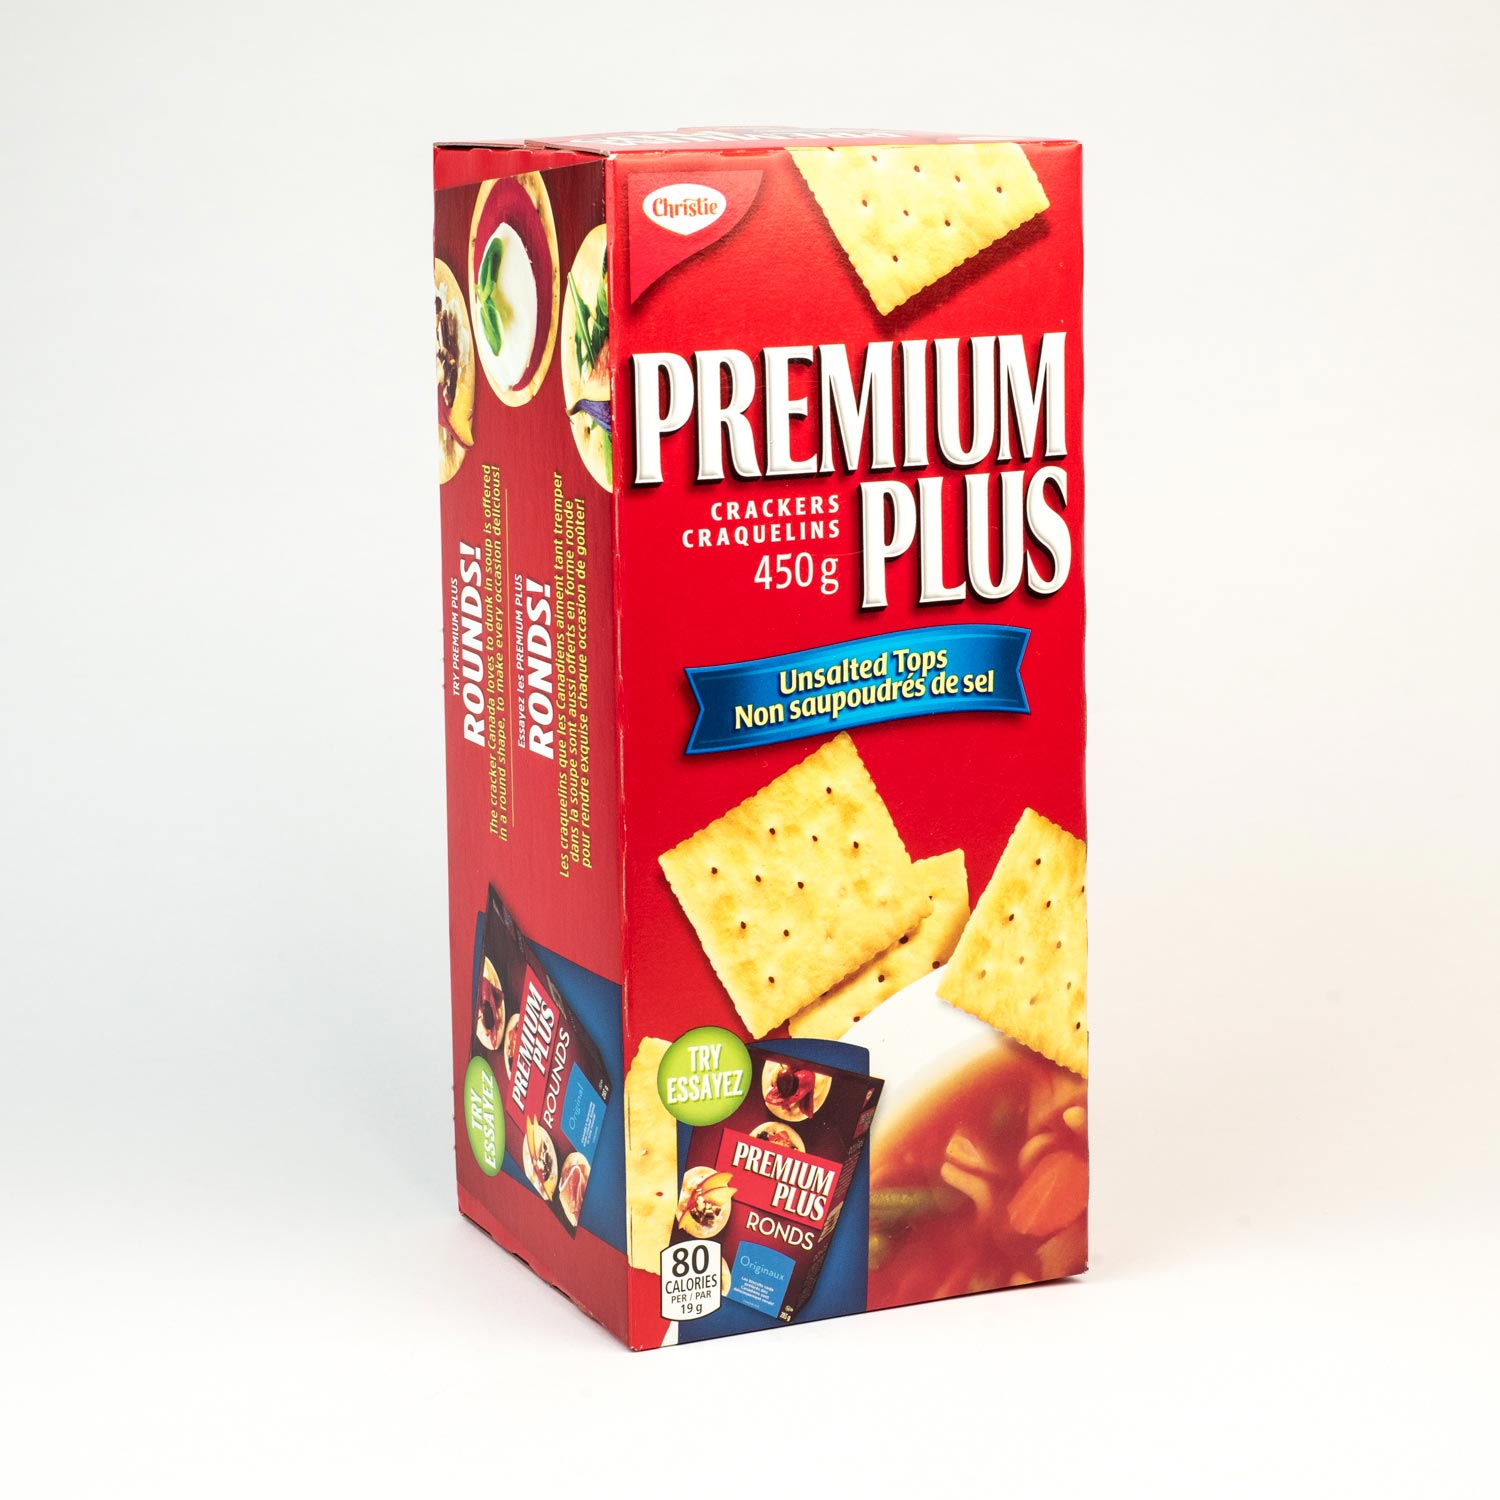 All in one protector premium plus crackers